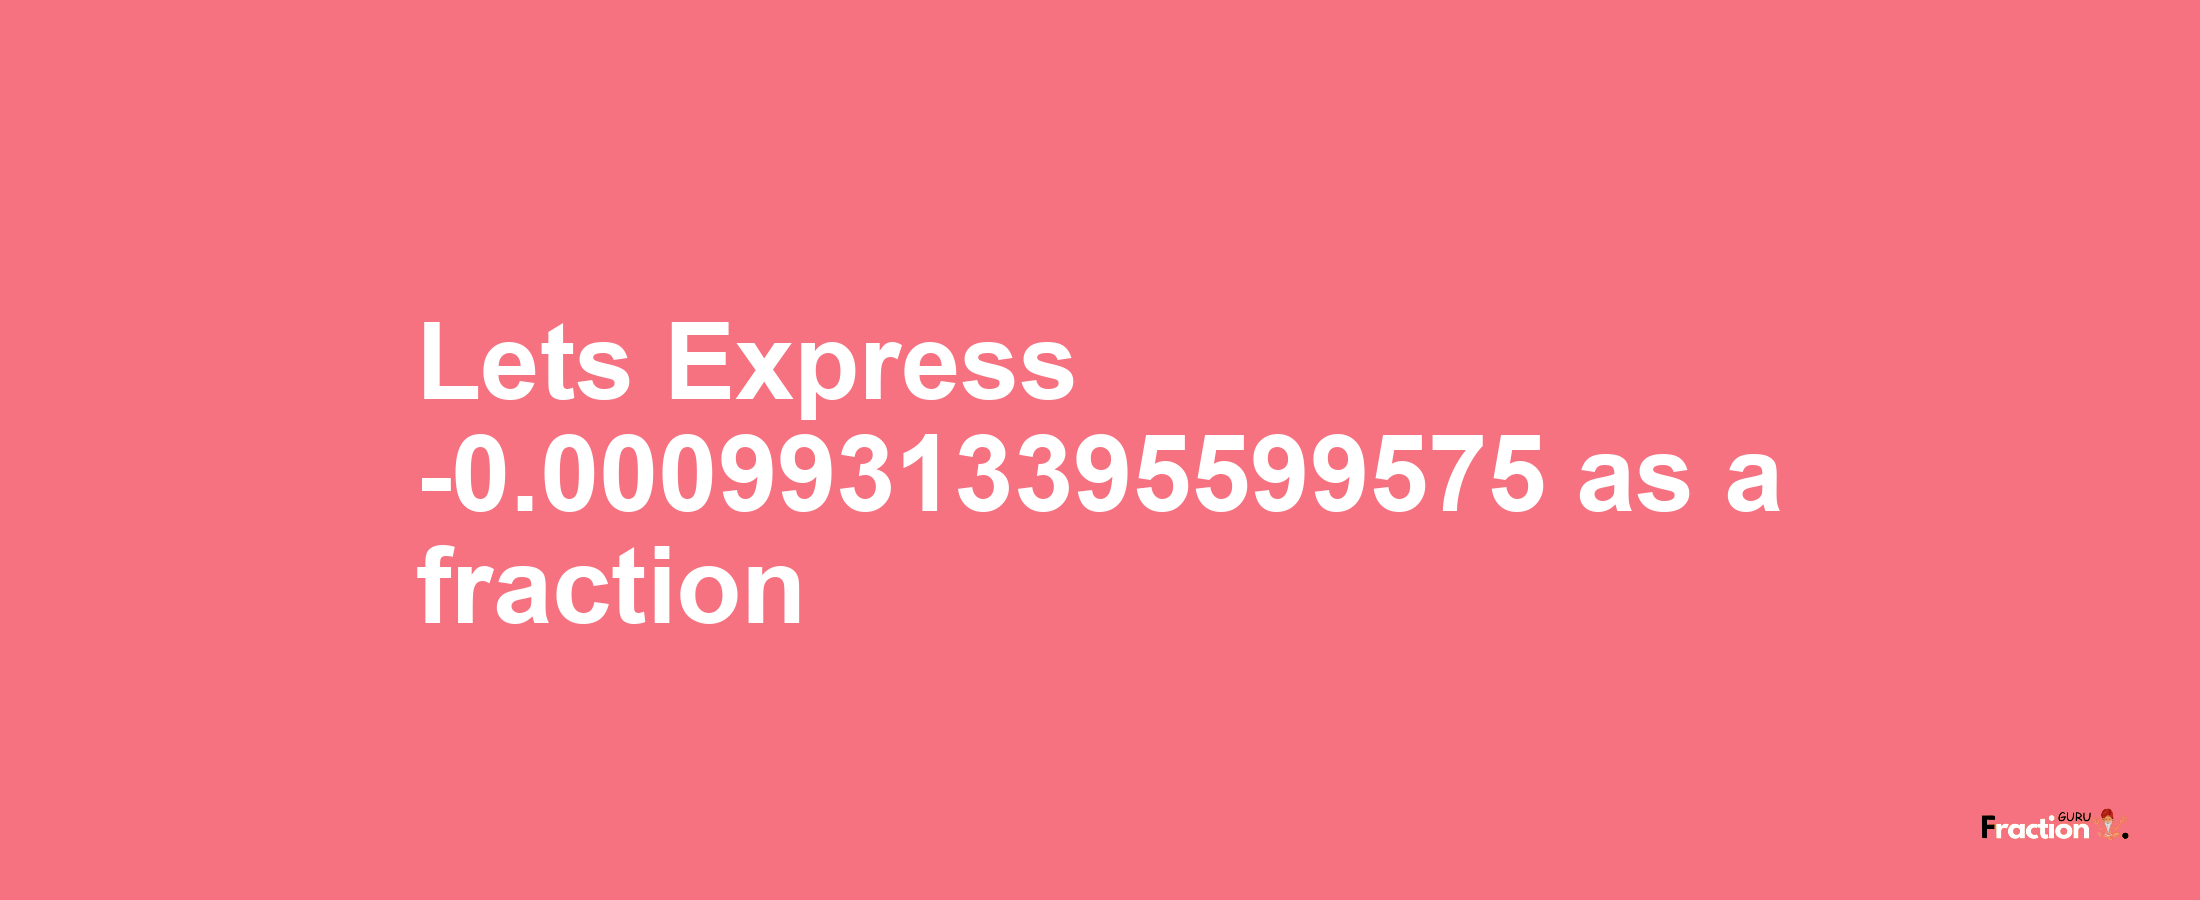 Lets Express -0.00099313395599575 as afraction